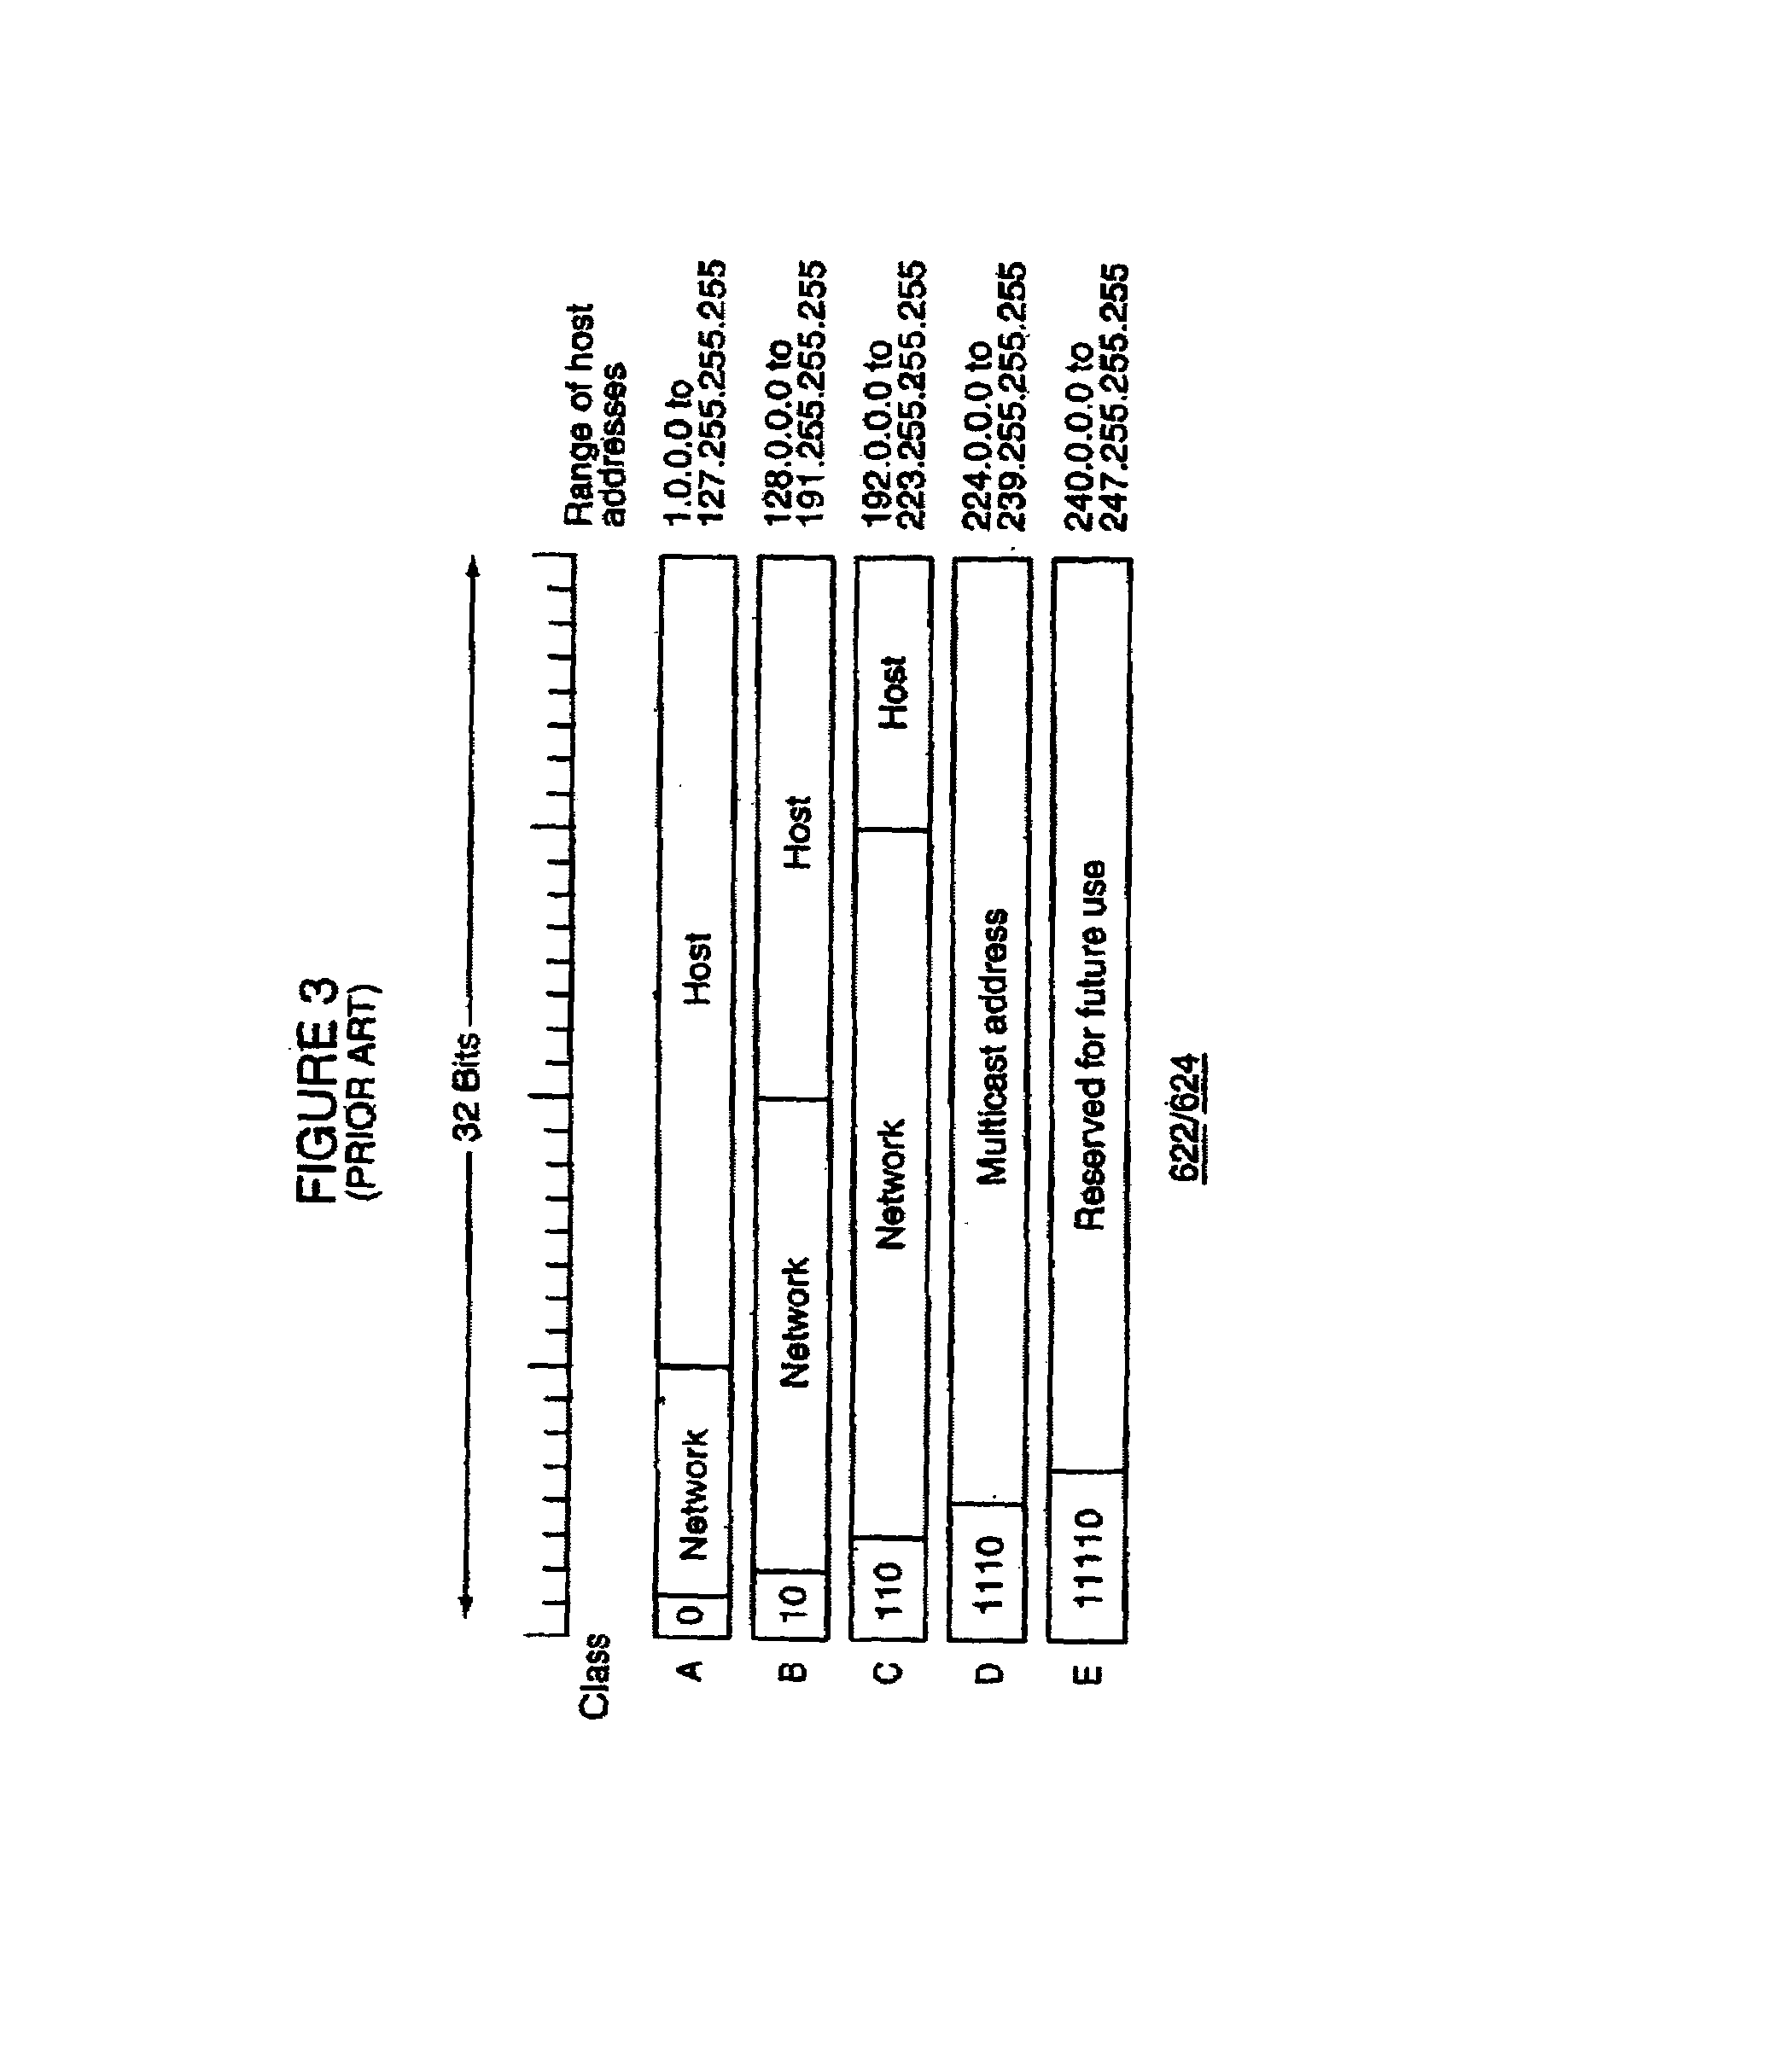 Methods, apparatus and data structures for preserving address and service level information in a virtual private network